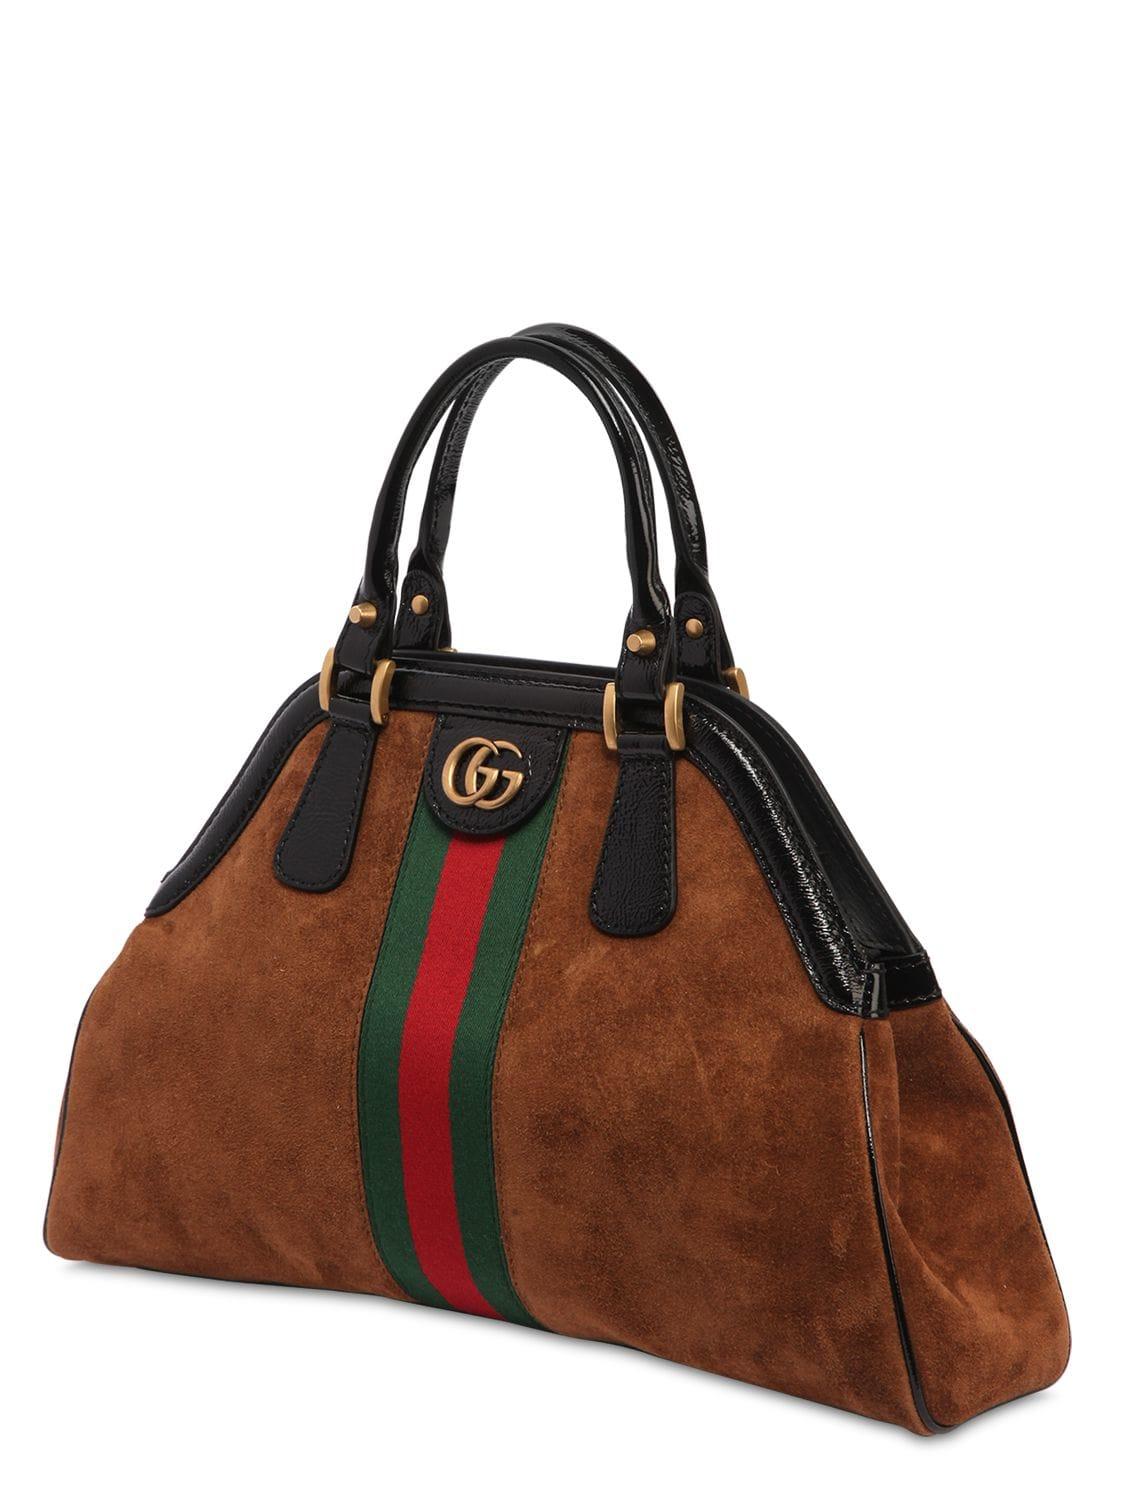 Gucci Large Re(belle) Suede Satchel in Brown | Lyst